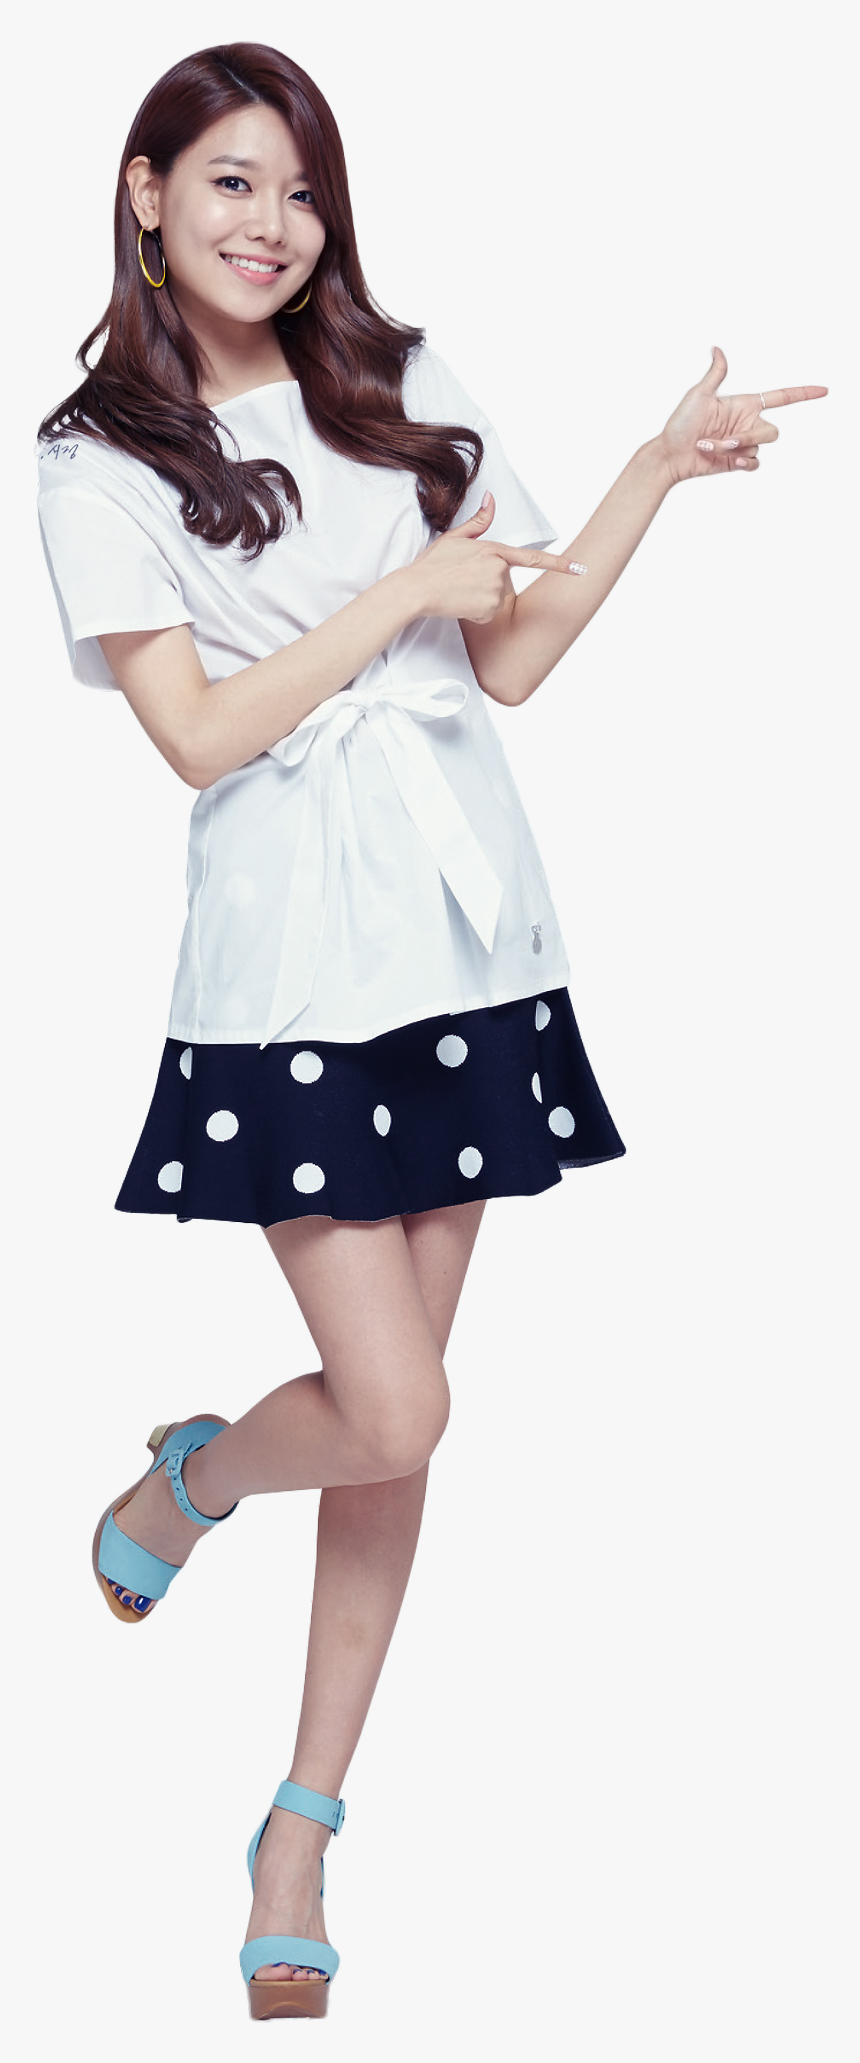 #sooyoung #choi Sooyoung #sooyoung Choi #sooyoungster - Sooyoung Hyoyeon, HD Png Download, Free Download